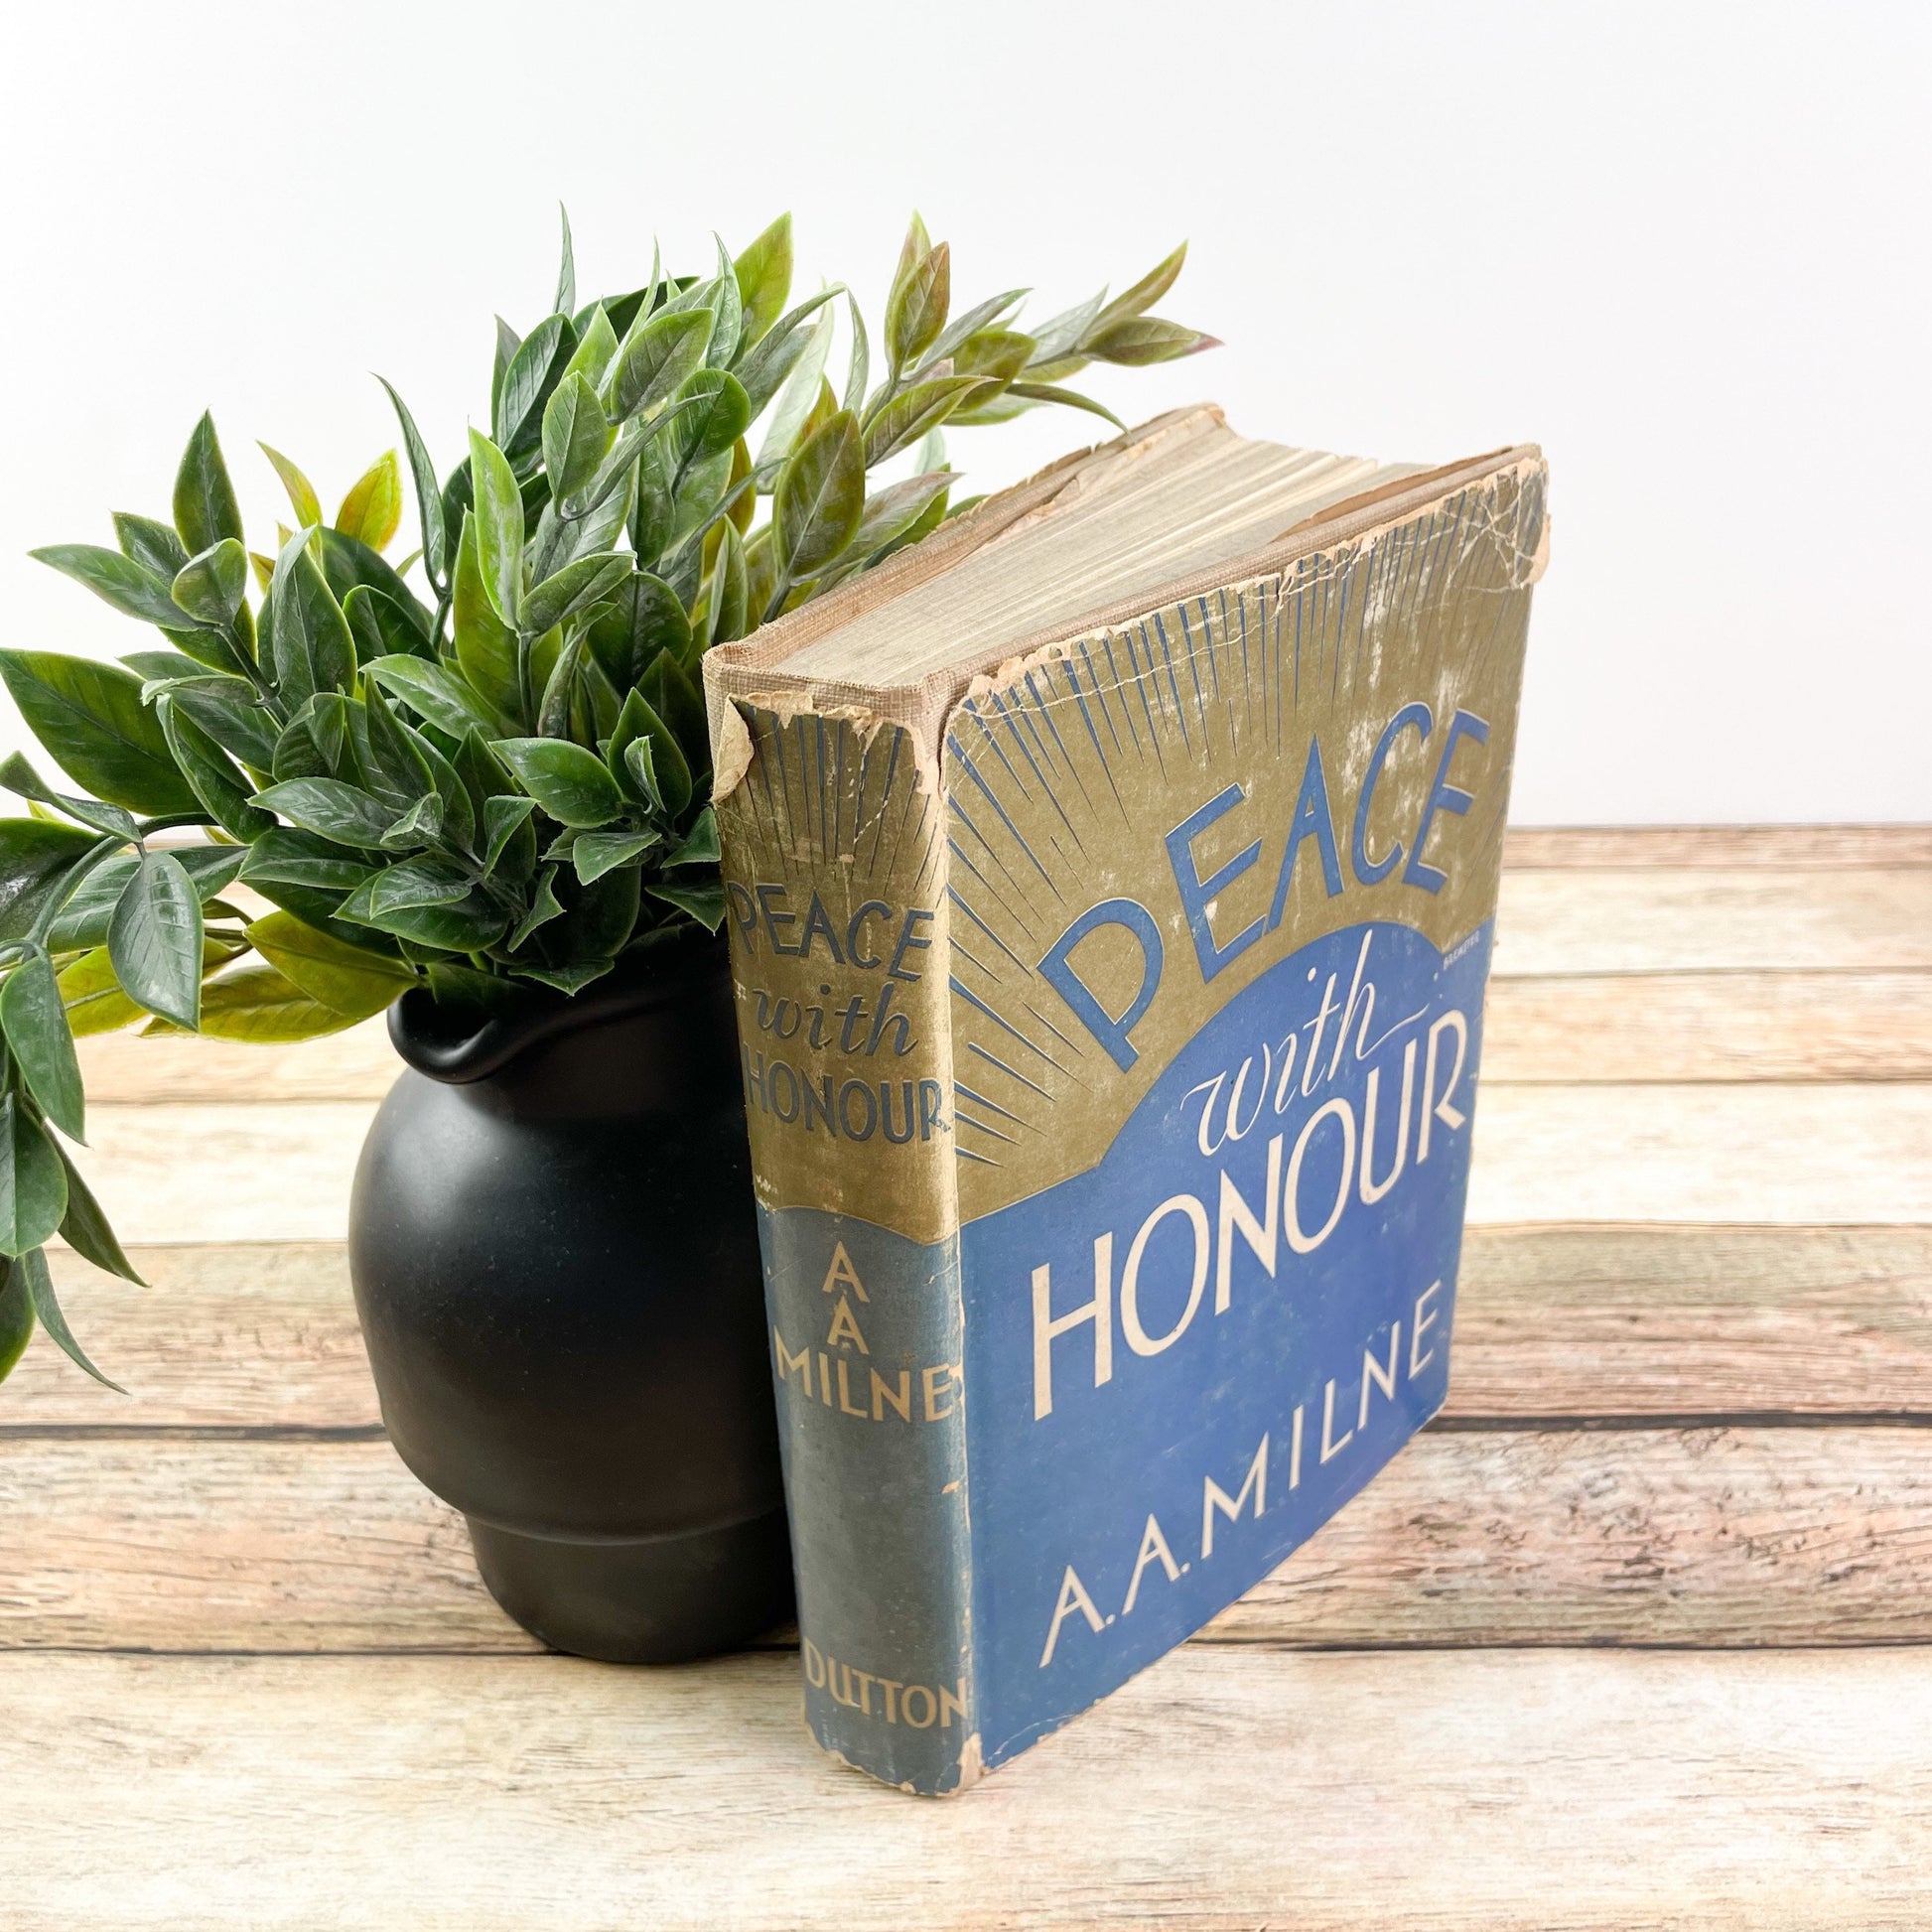 Vintage Book, Rare Book, Peace with Honour by A.A. Milne